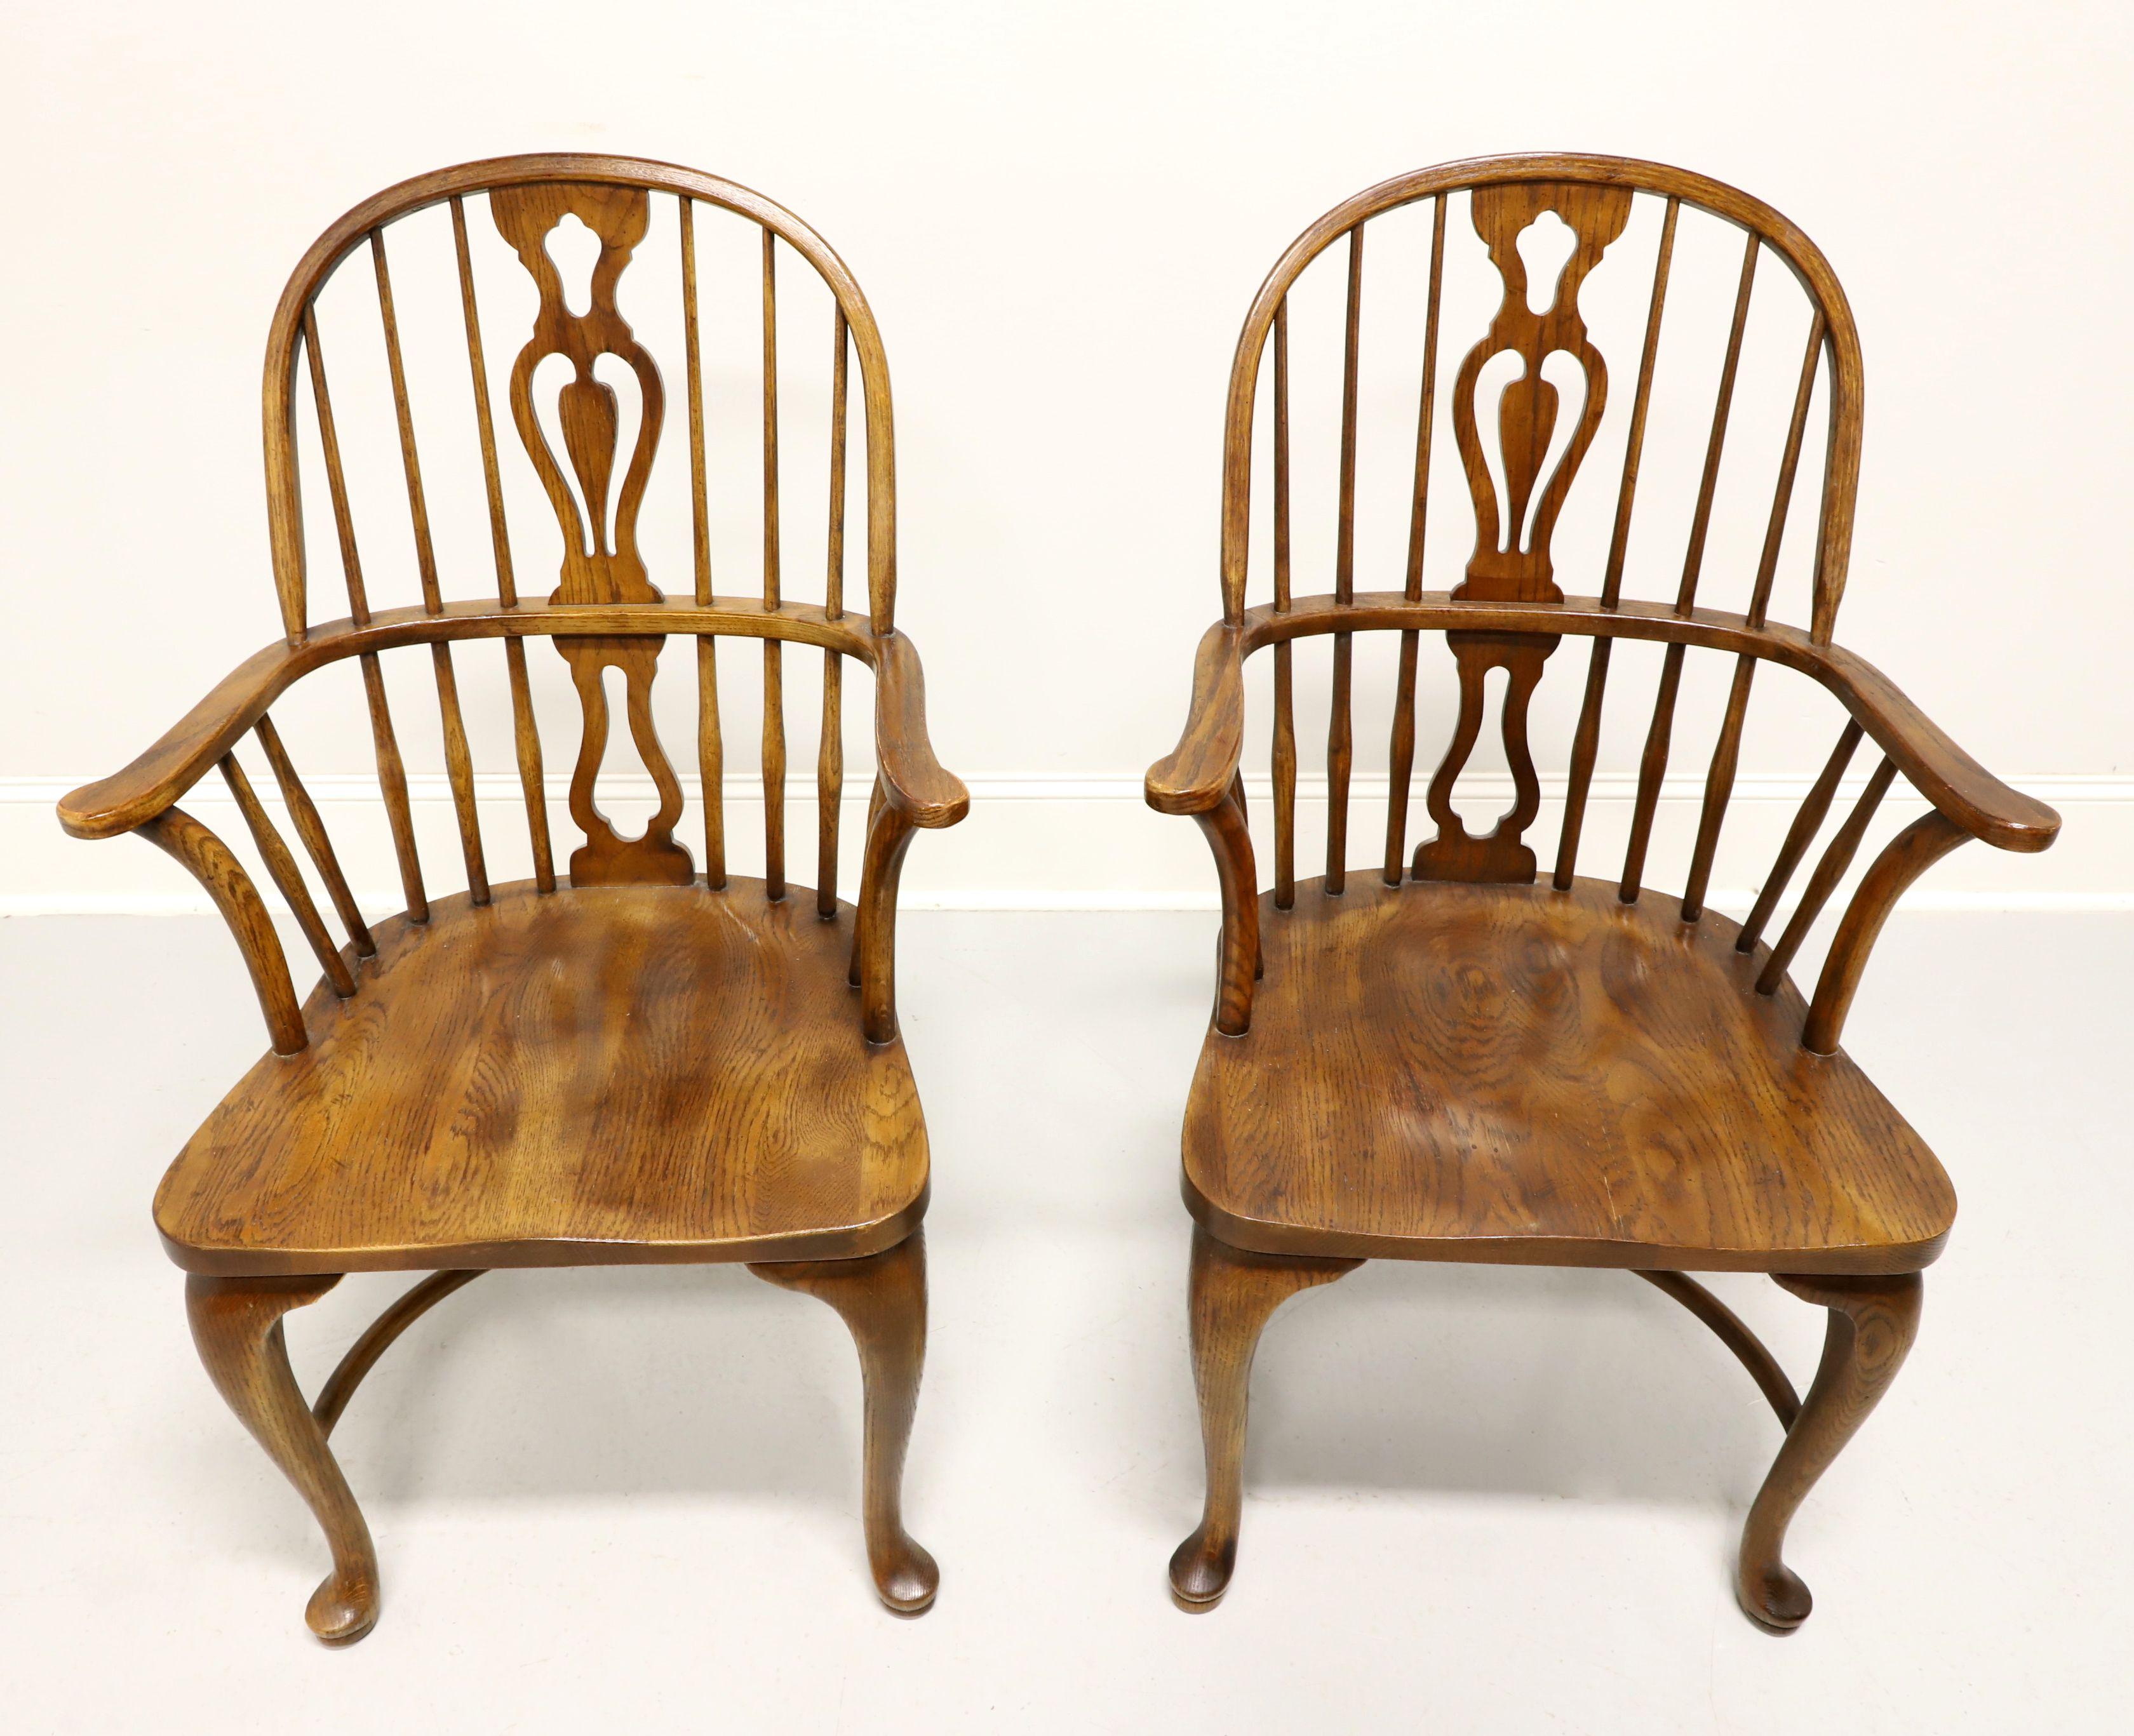 A pair of Windsor style dining armchairs by Drexel Heritage. Solid oak, hoop back with spindles, decoratively carved backrest, cross the back curved arms with support spindles, saddle shape seat, cabriole front legs with pad feet, turned back legs